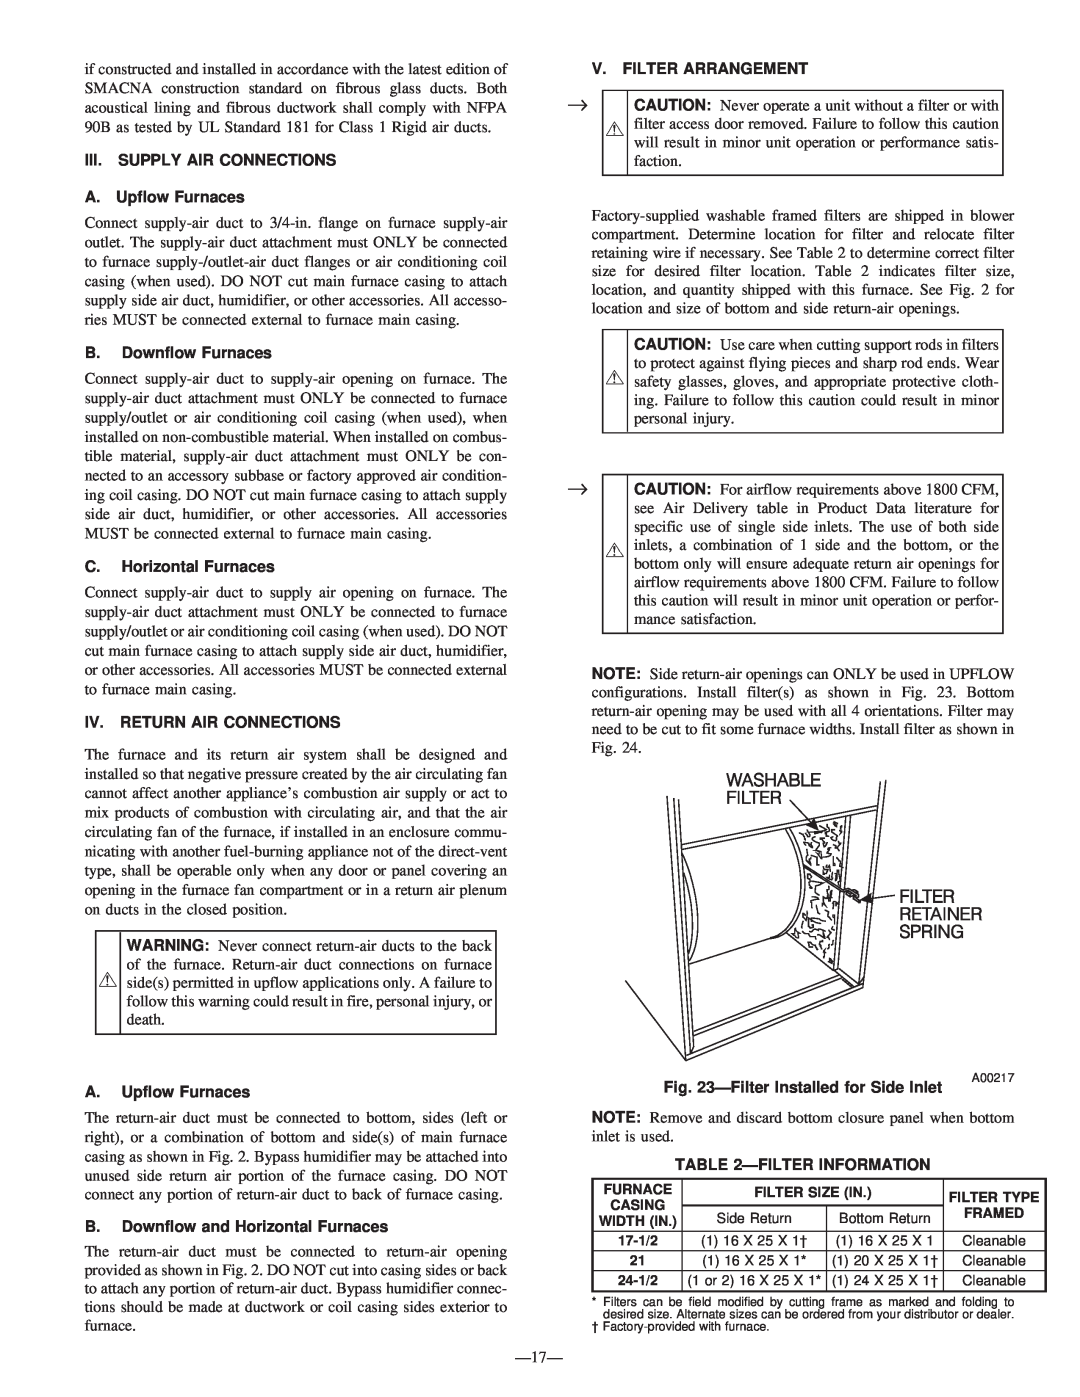 Bryant 340MAV instruction manual III. SUPPLY AIR CONNECTIONS A. Upflow Furnaces, B.Downflow Furnaces, C.Horizontal Furnaces 